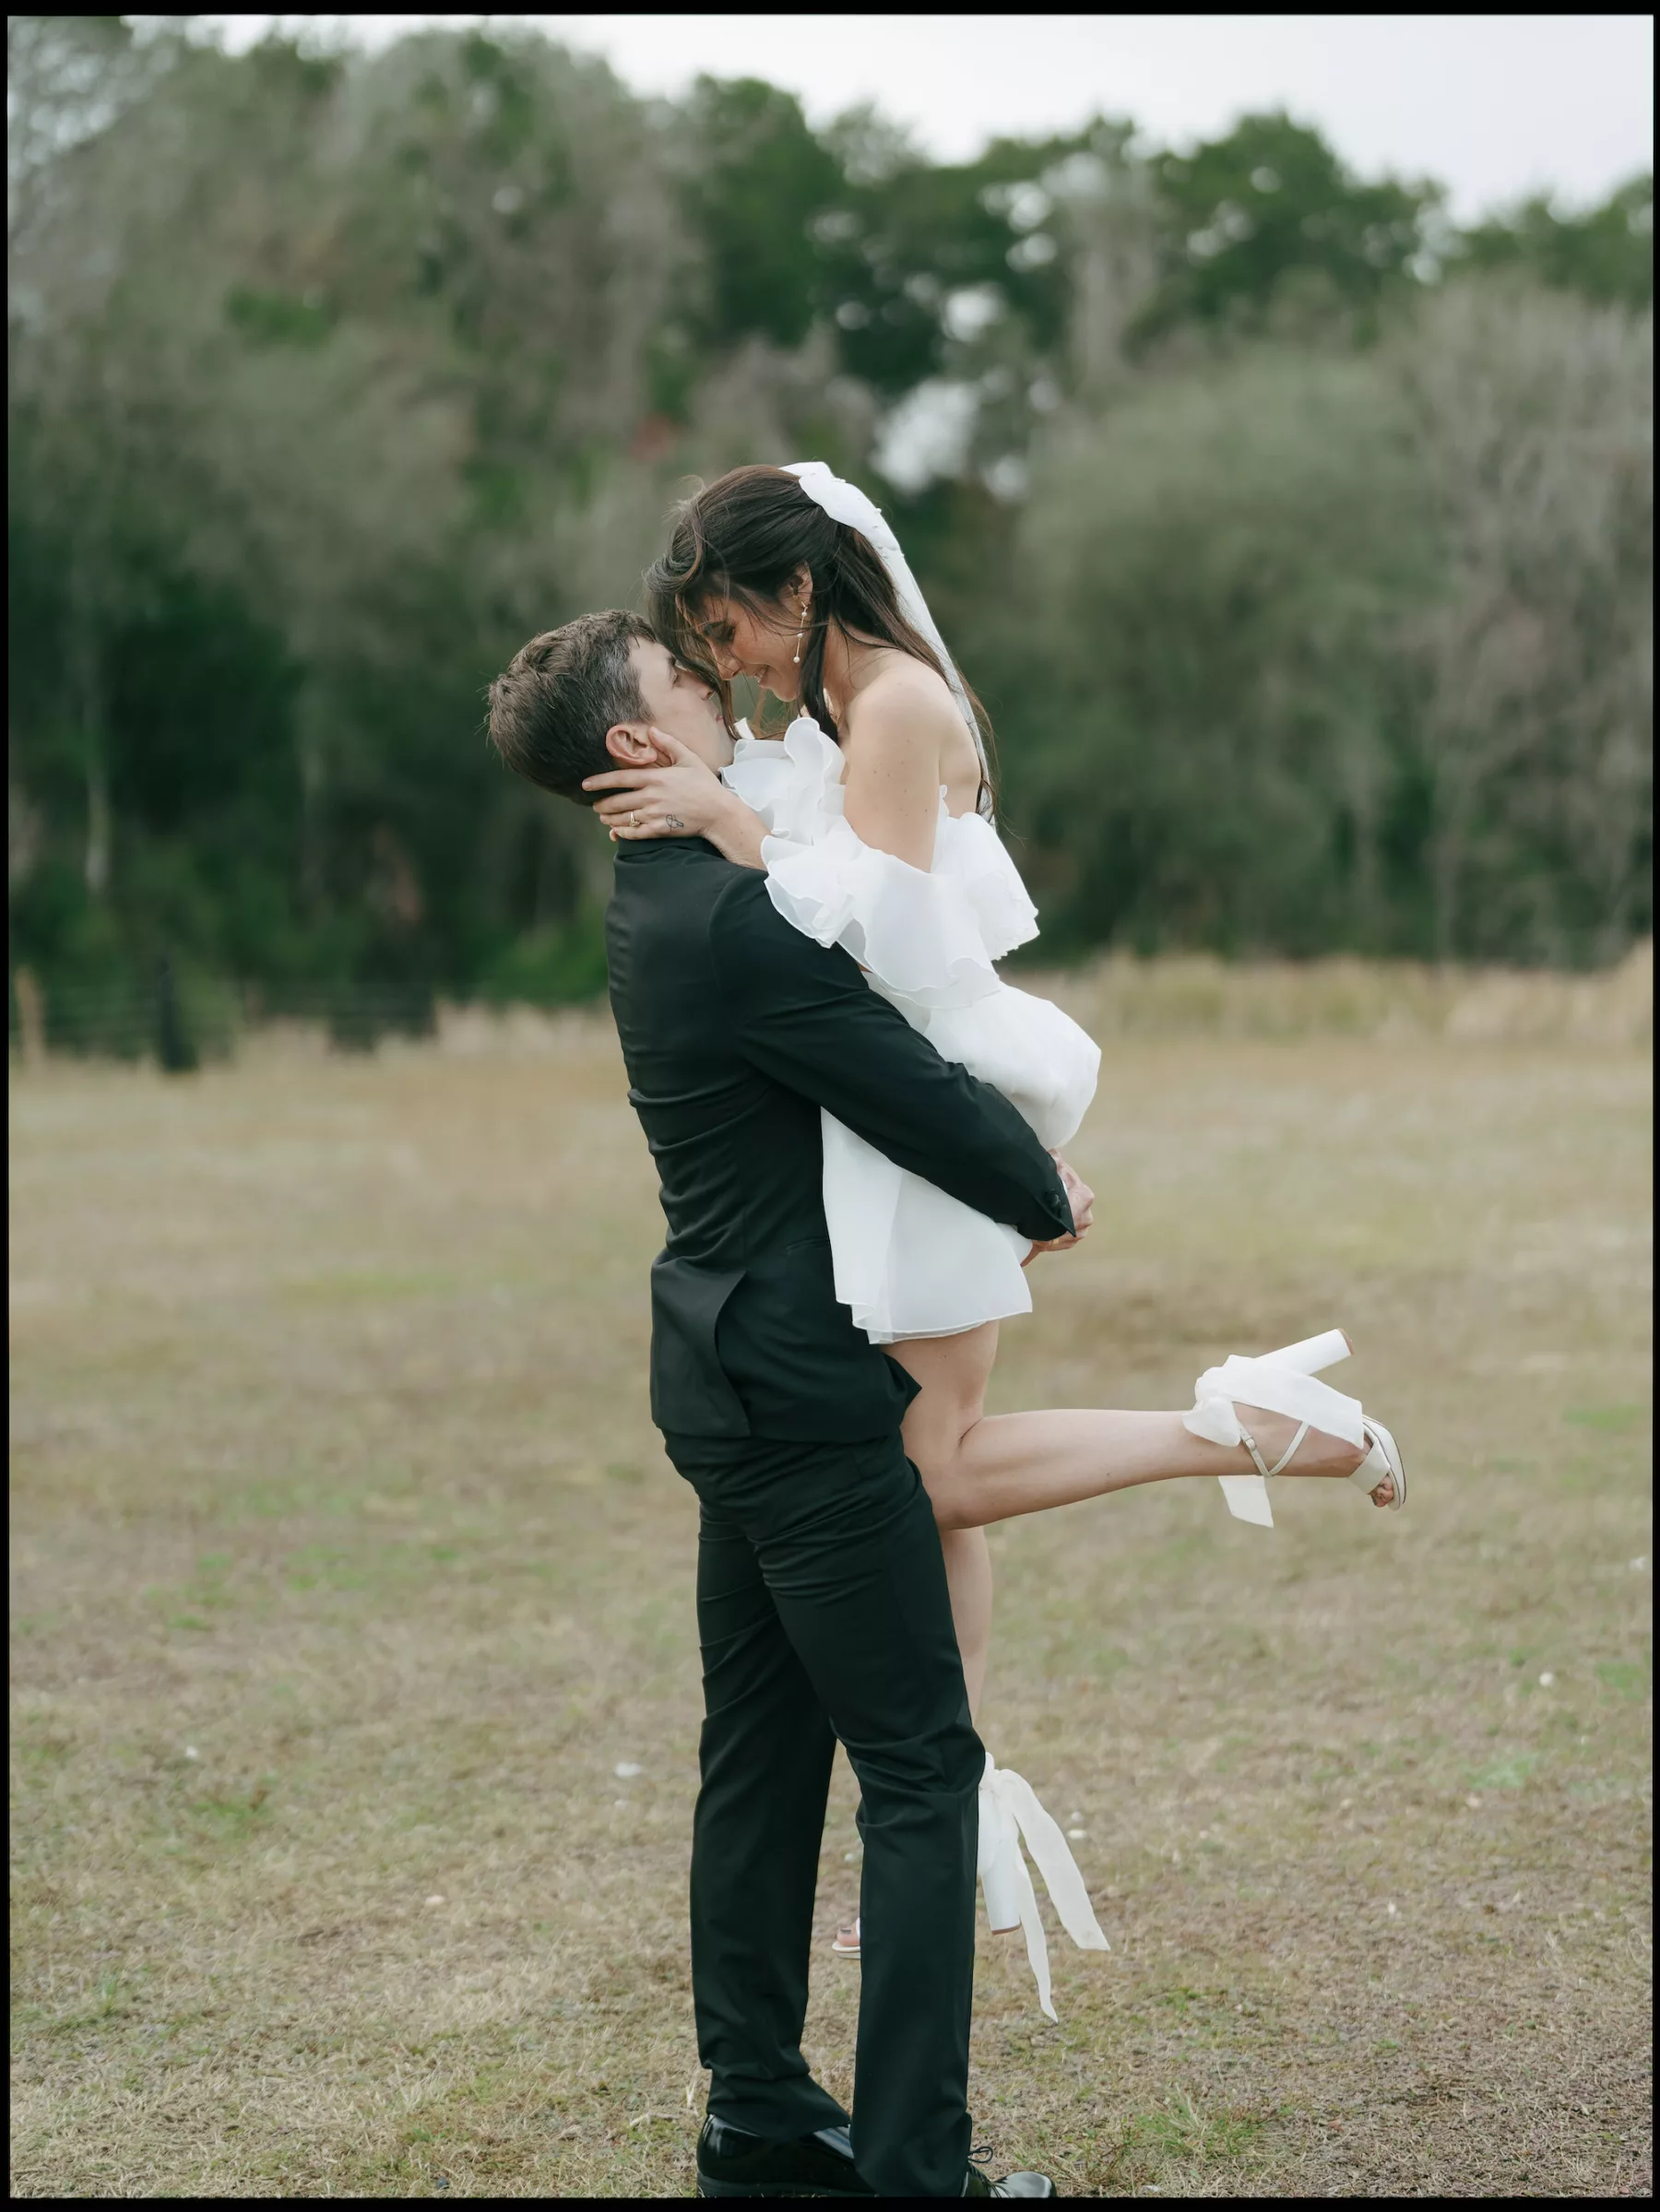 Romantic Moody Bride and Groom Wedding Portrait | Tampa Bay Film Photographer Amber Yonker Photography